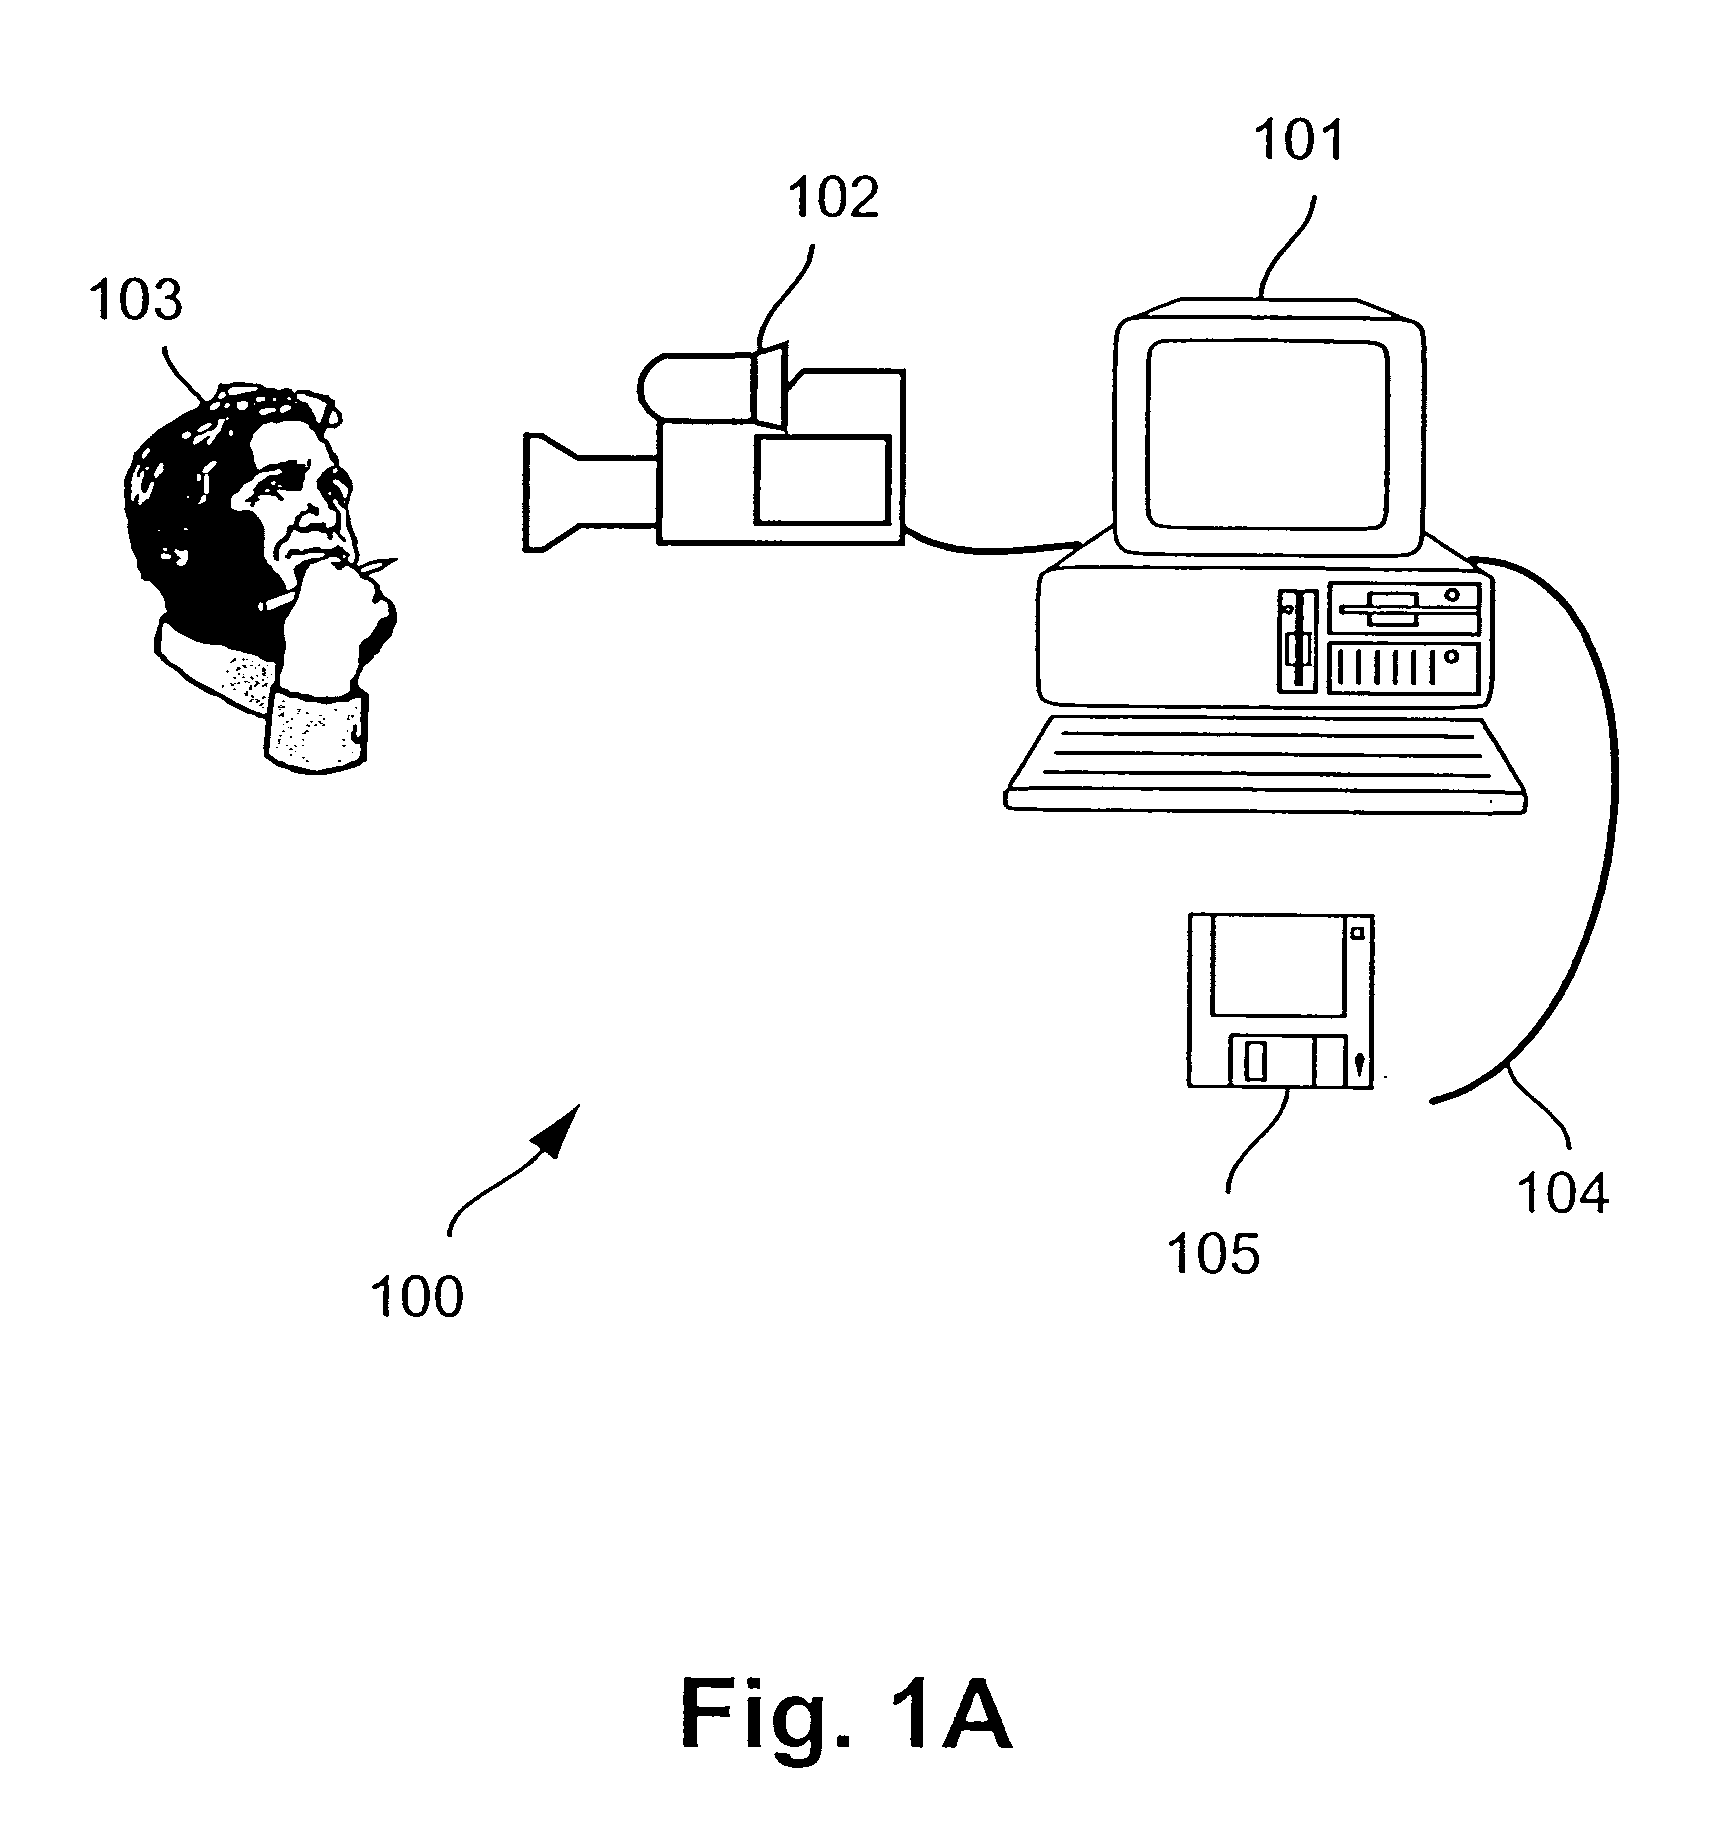 Method and system for conveying video messages